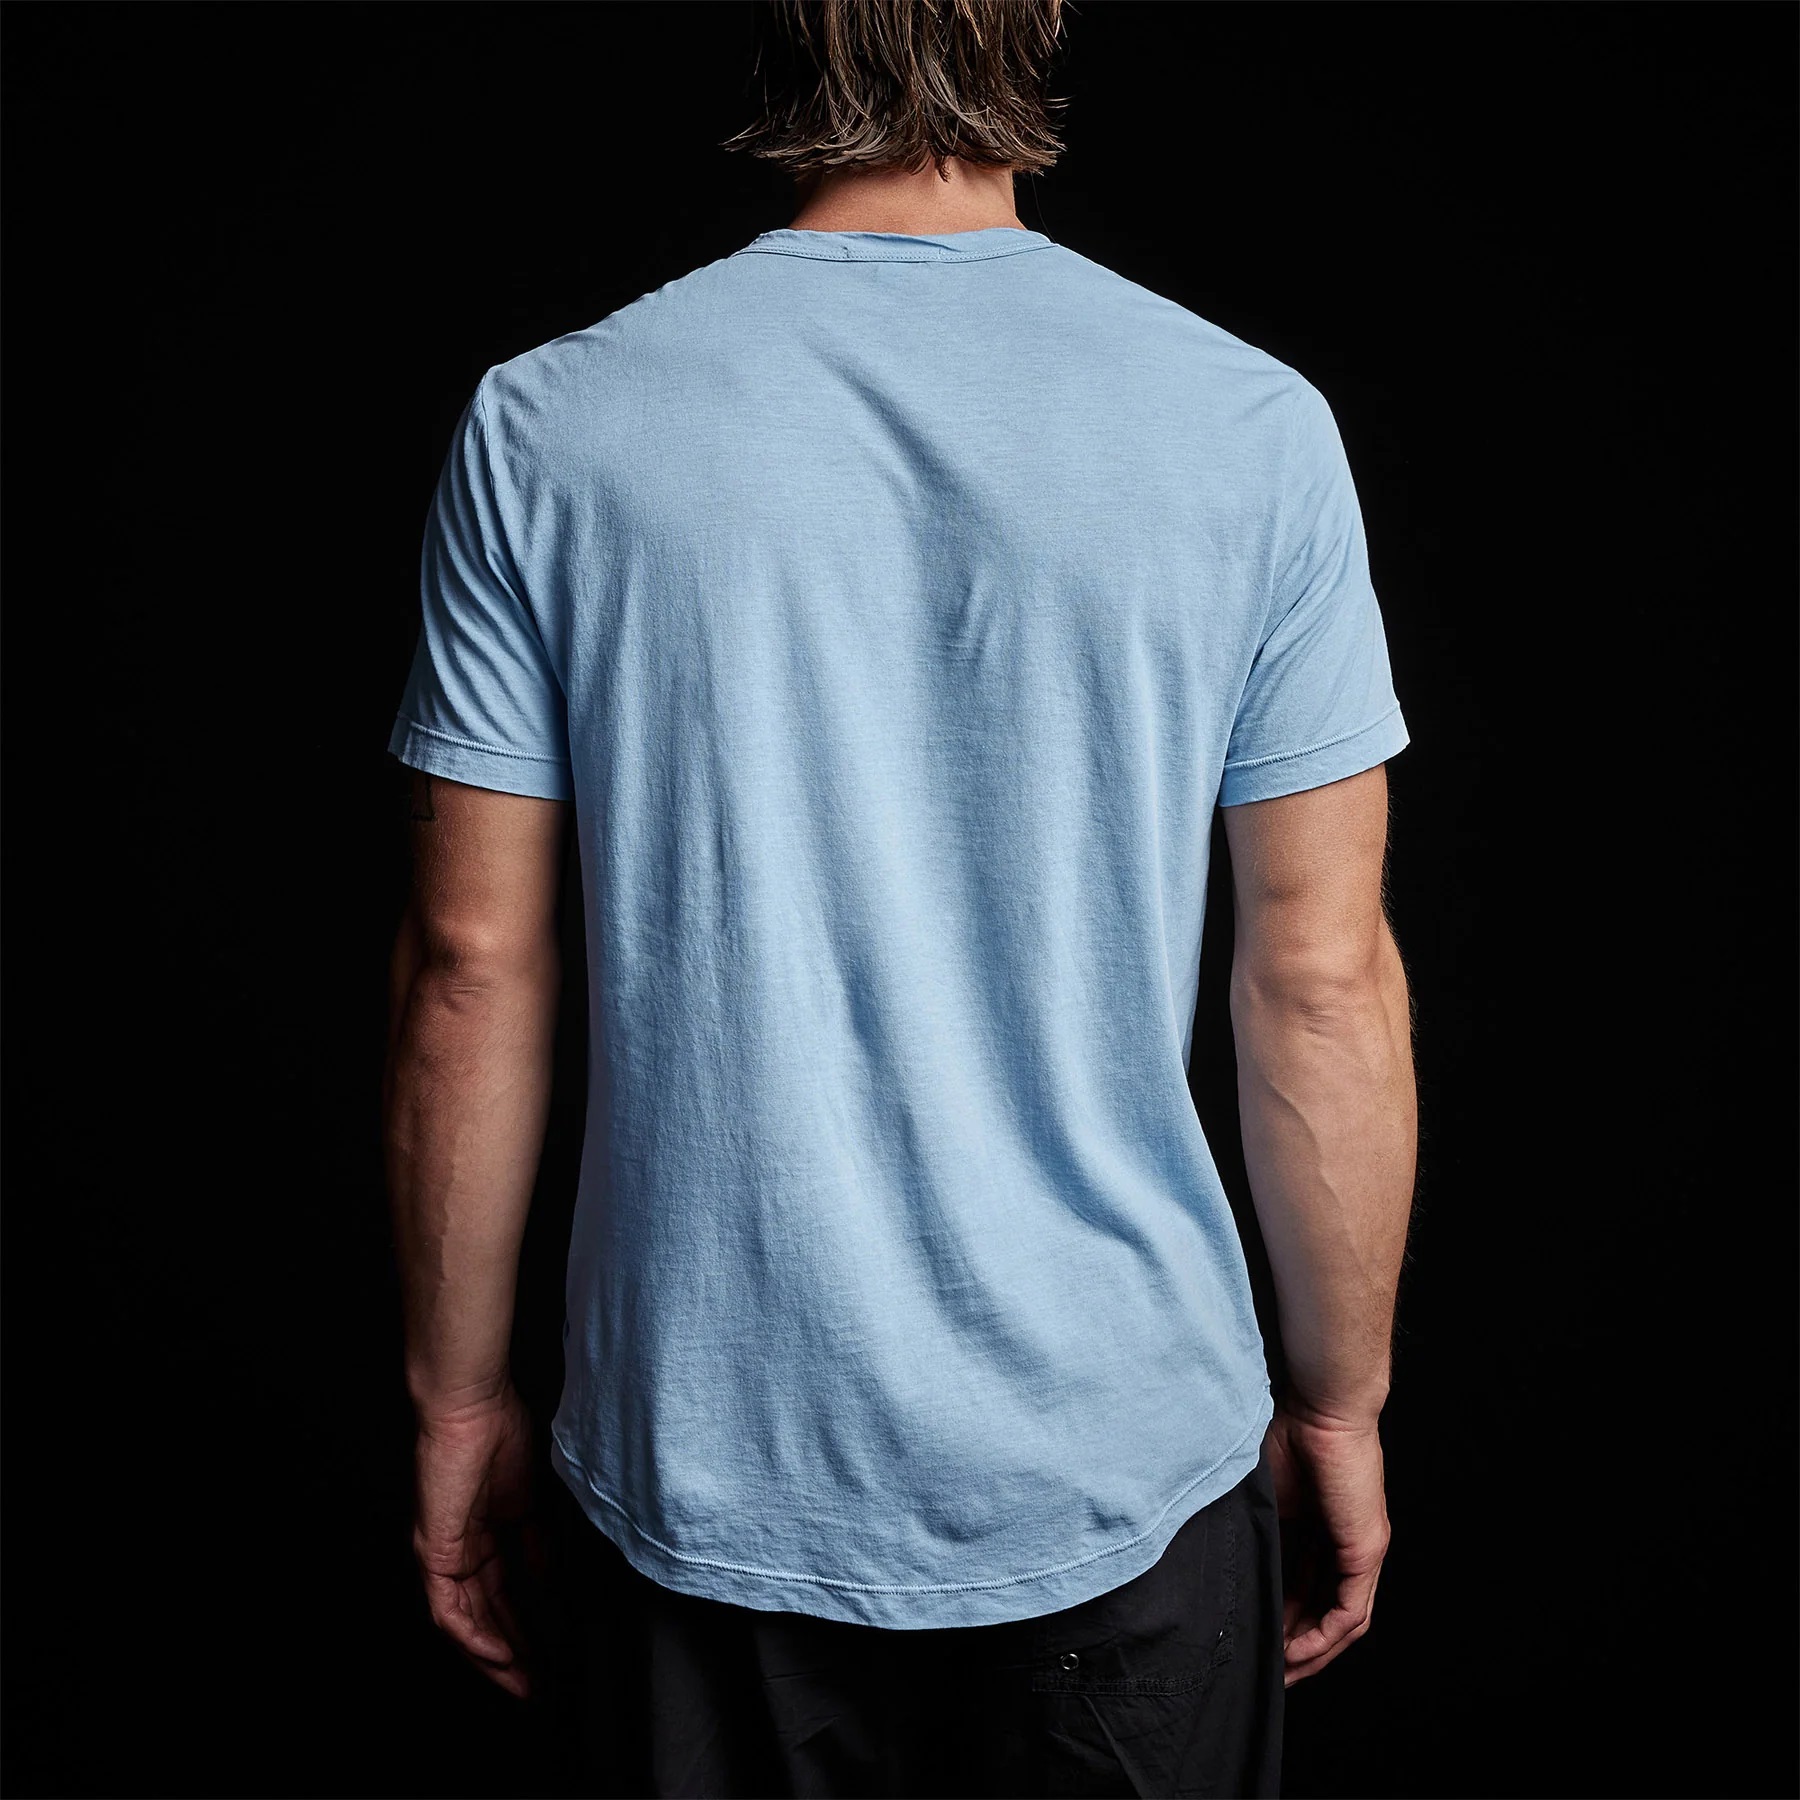 JAMES PERSE Clear Jersey Crew Neck in Light Blue M/2